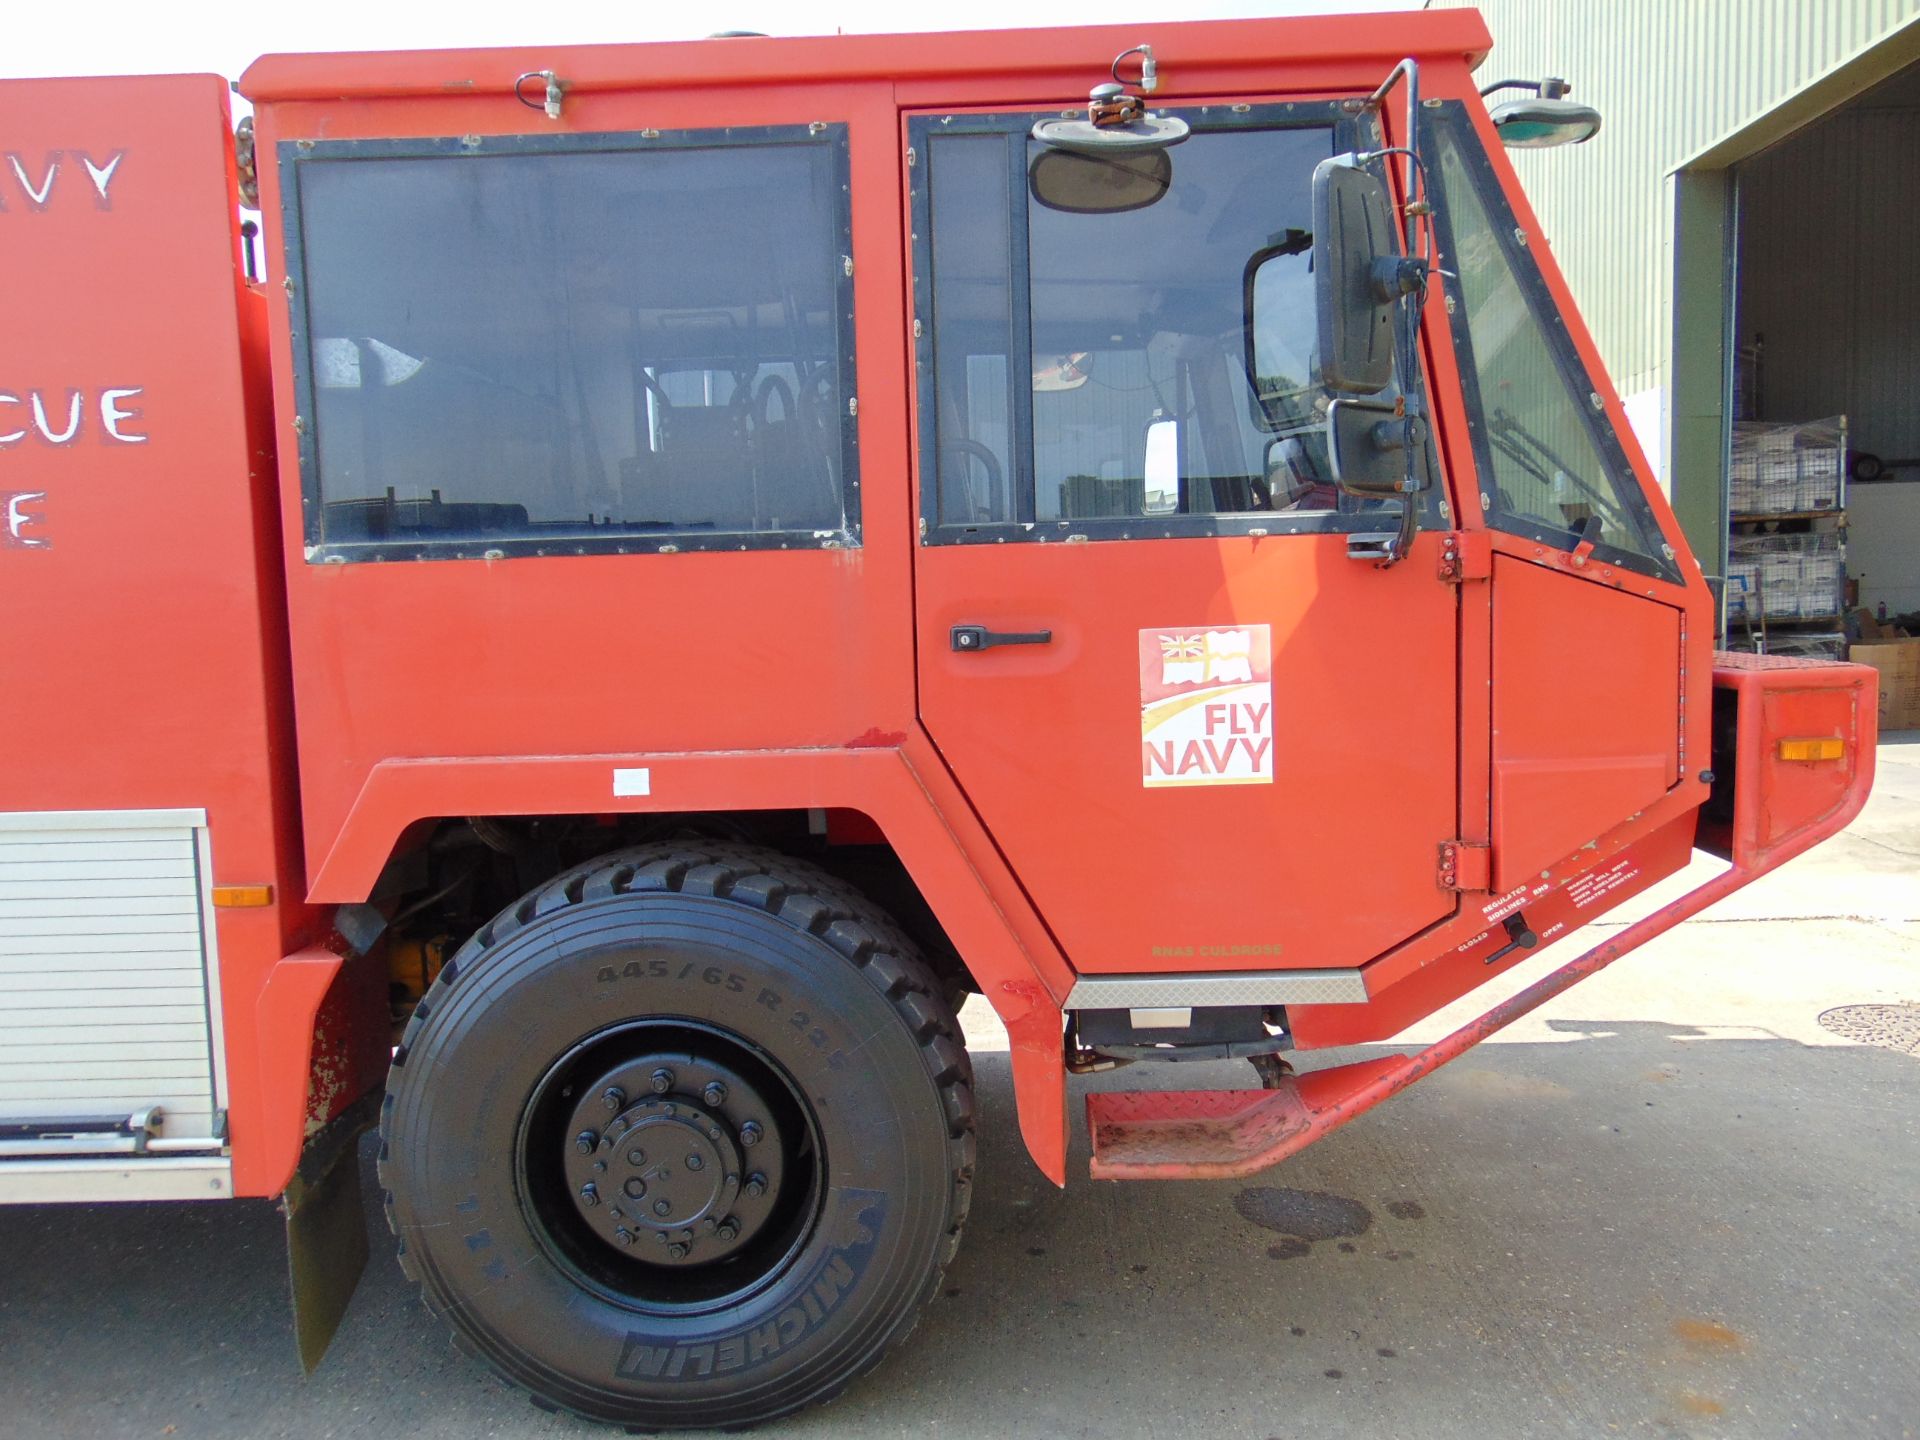 Unipower 4 x 4 Airport Fire Fighting Appliance - Rapid Intervention Vehicle - Image 46 of 73